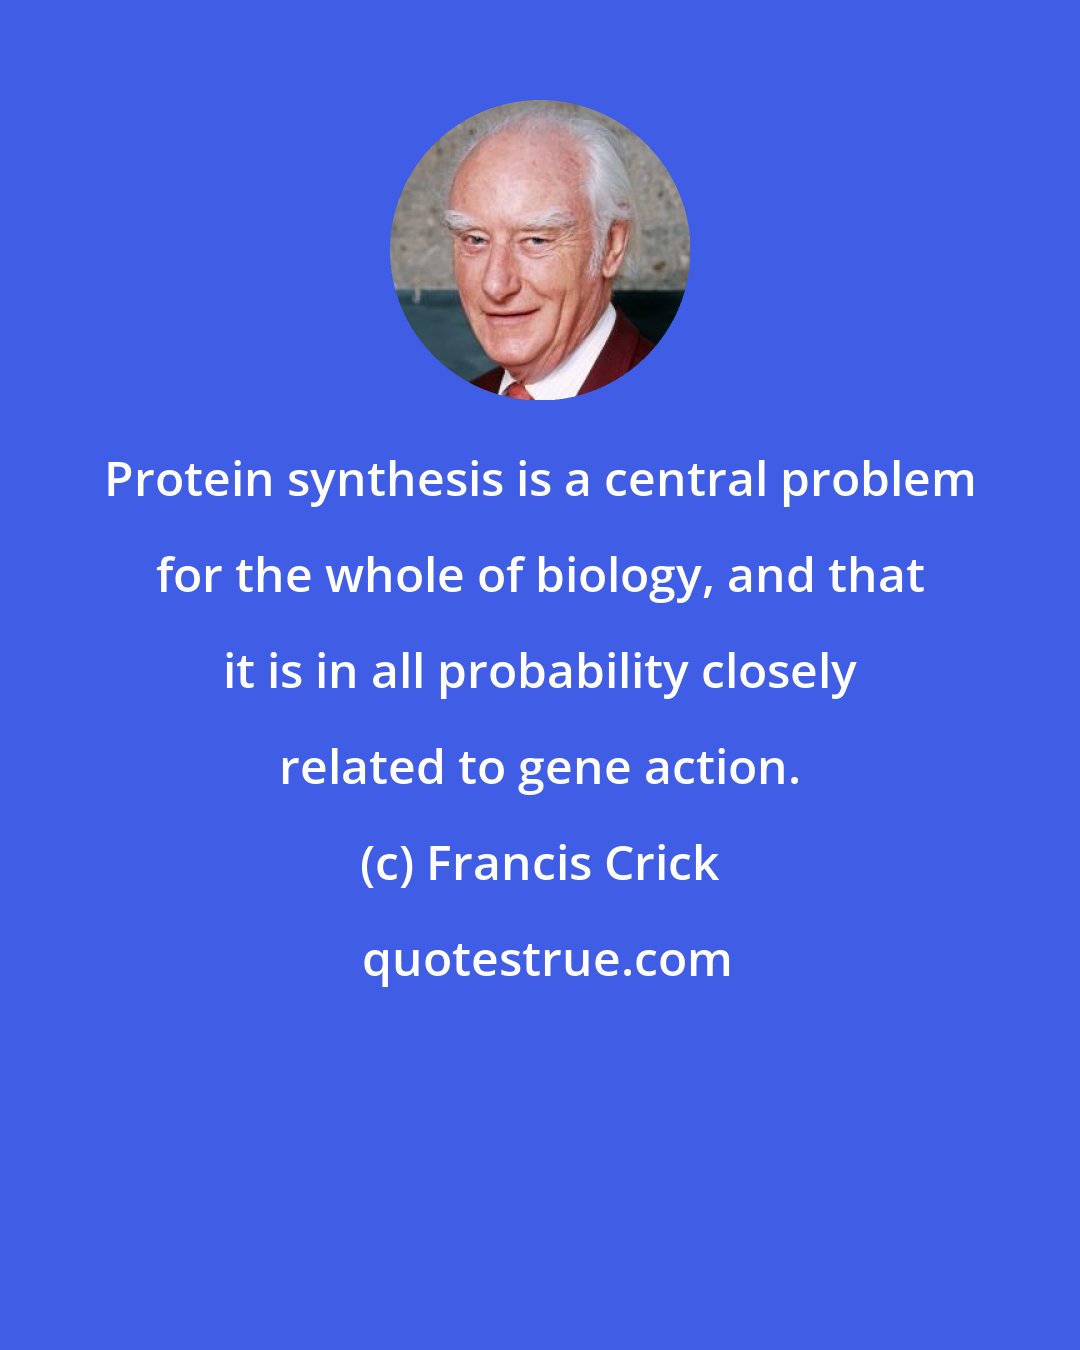 Francis Crick: Protein synthesis is a central problem for the whole of biology, and that it is in all probability closely related to gene action.